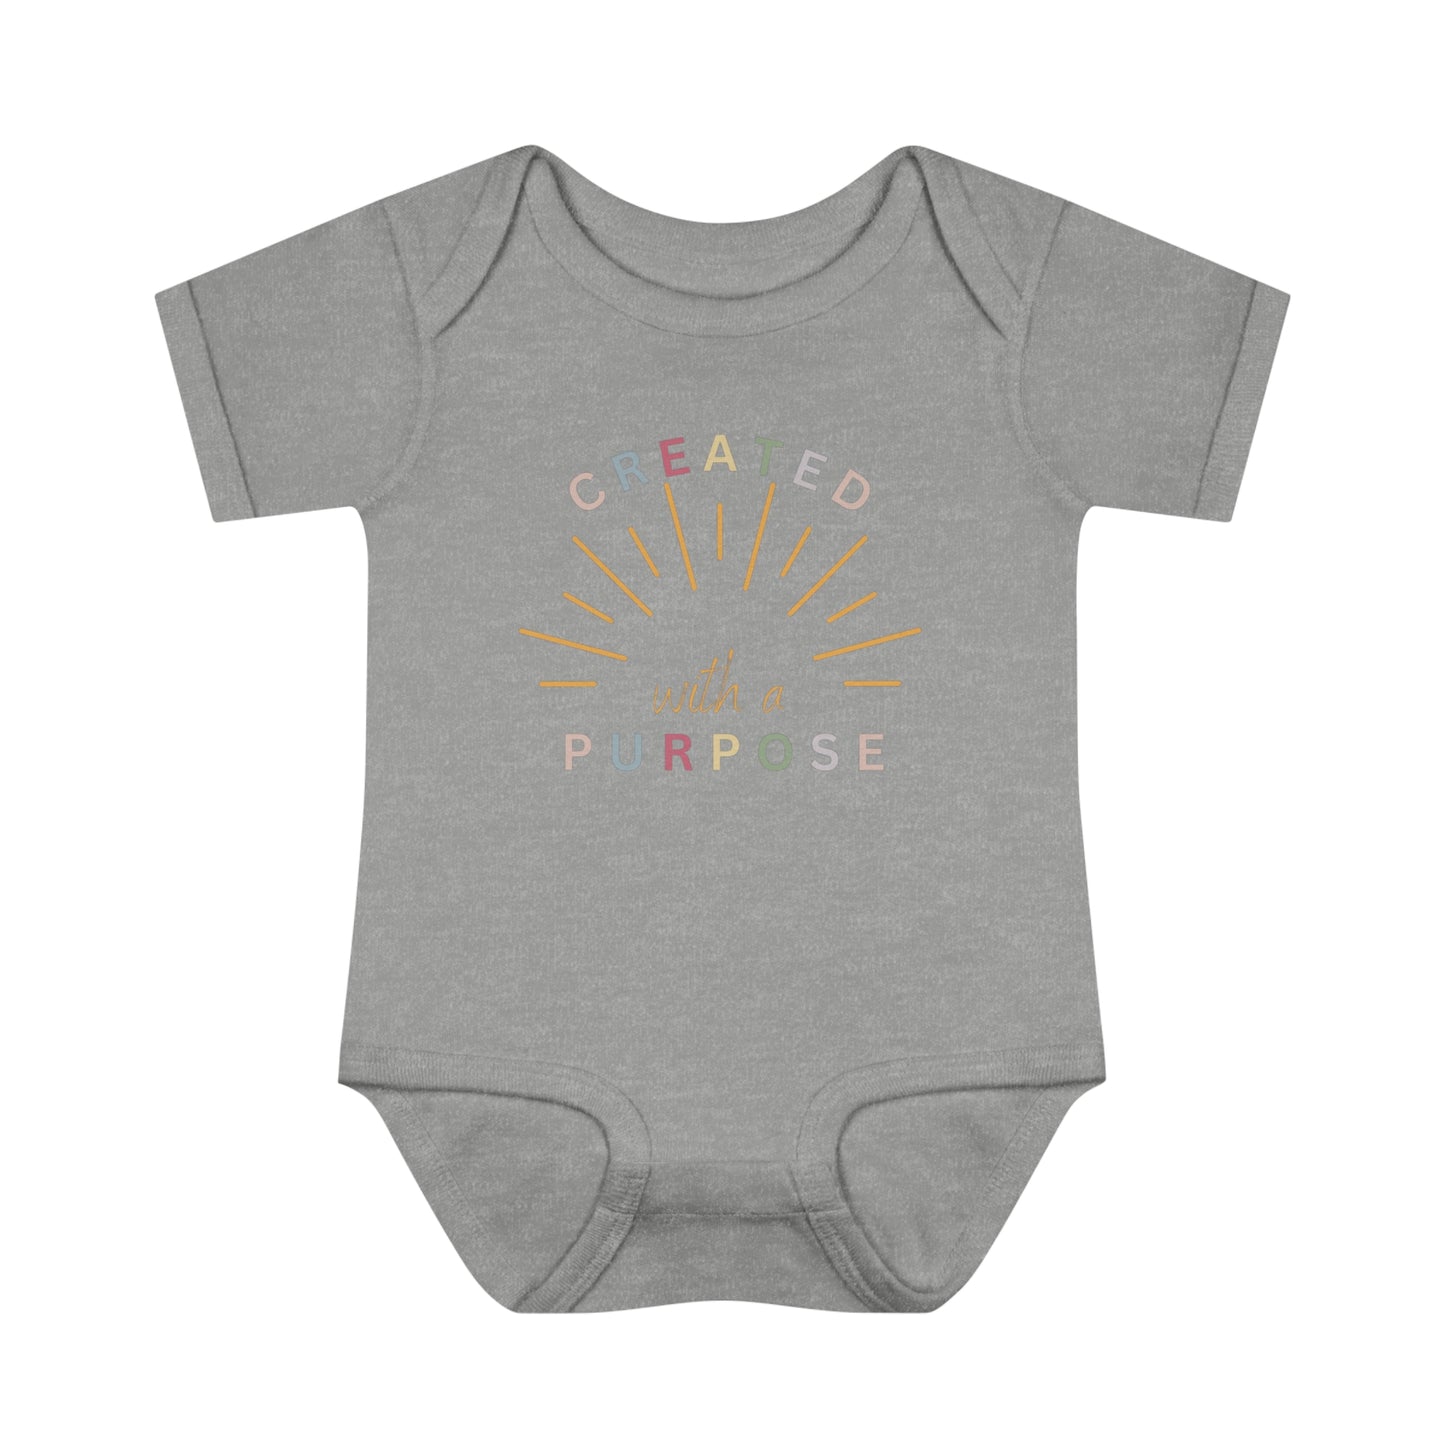 Created With A Purpose, Infant Baby Rib Bodysuit